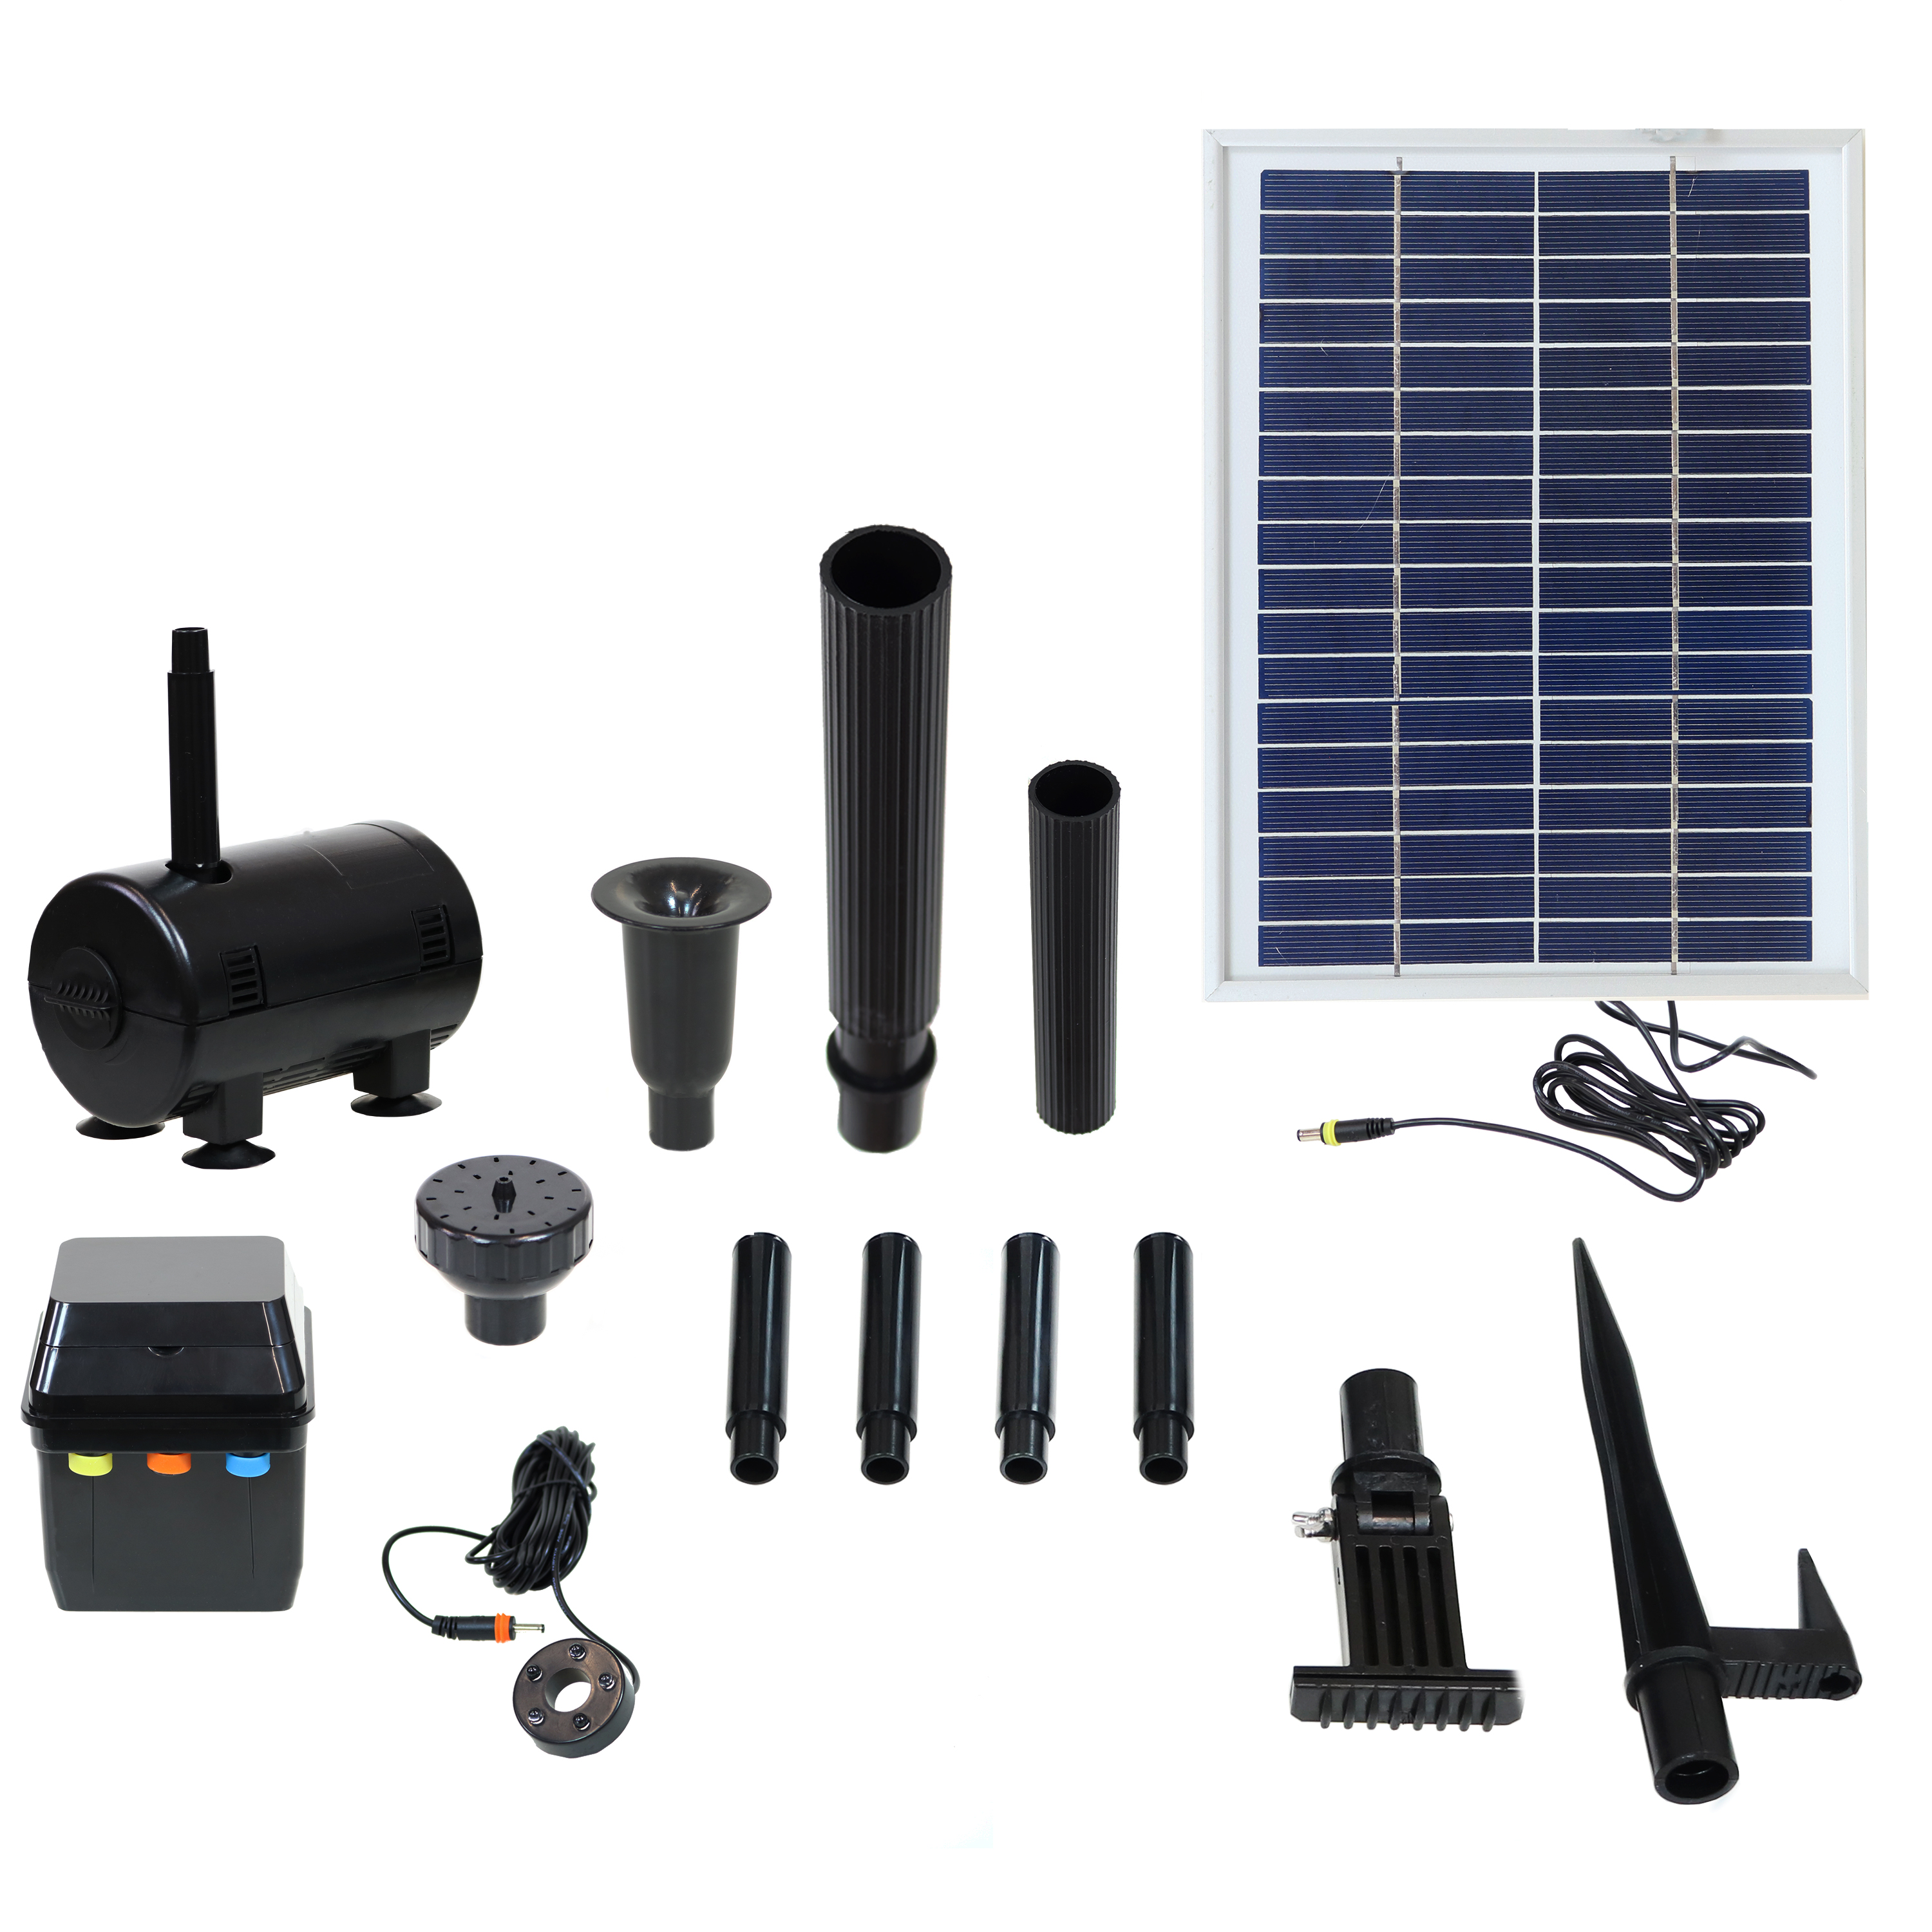 132 GPH Solar Pump and Panel Kit with Battery and Light